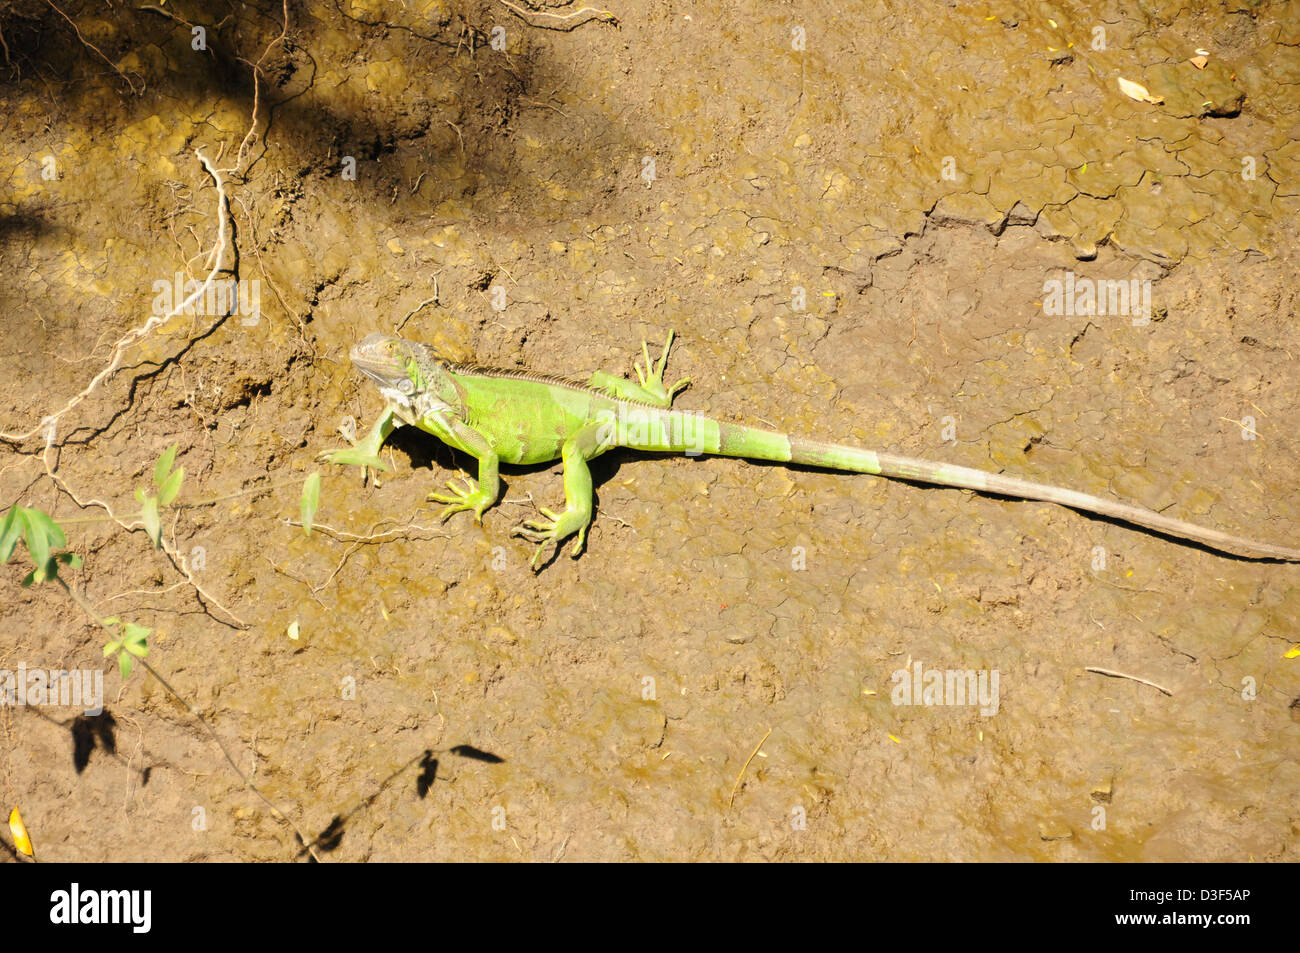 A jesus christ lizard along the mud of a river bank in Costa Rica Stock Photo